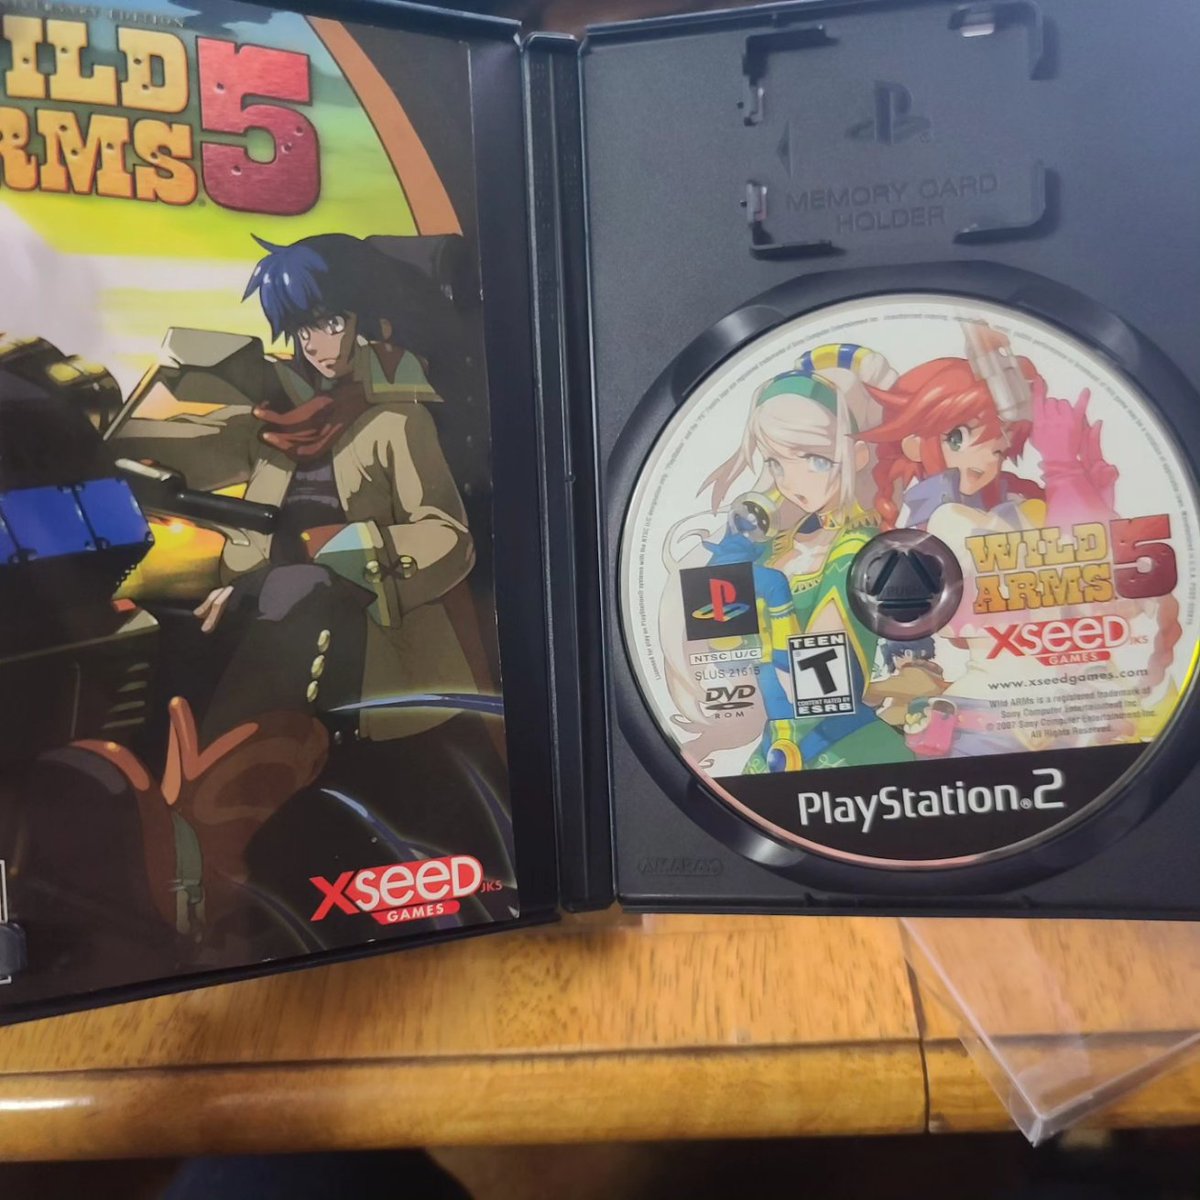 Wild Arms collection! #retrocollecting #retrocollection #playstation #playstation2 #videogames #gamer #gaming #retro #retrocollector #viral #trending #fyp #foryoupage #wildarms